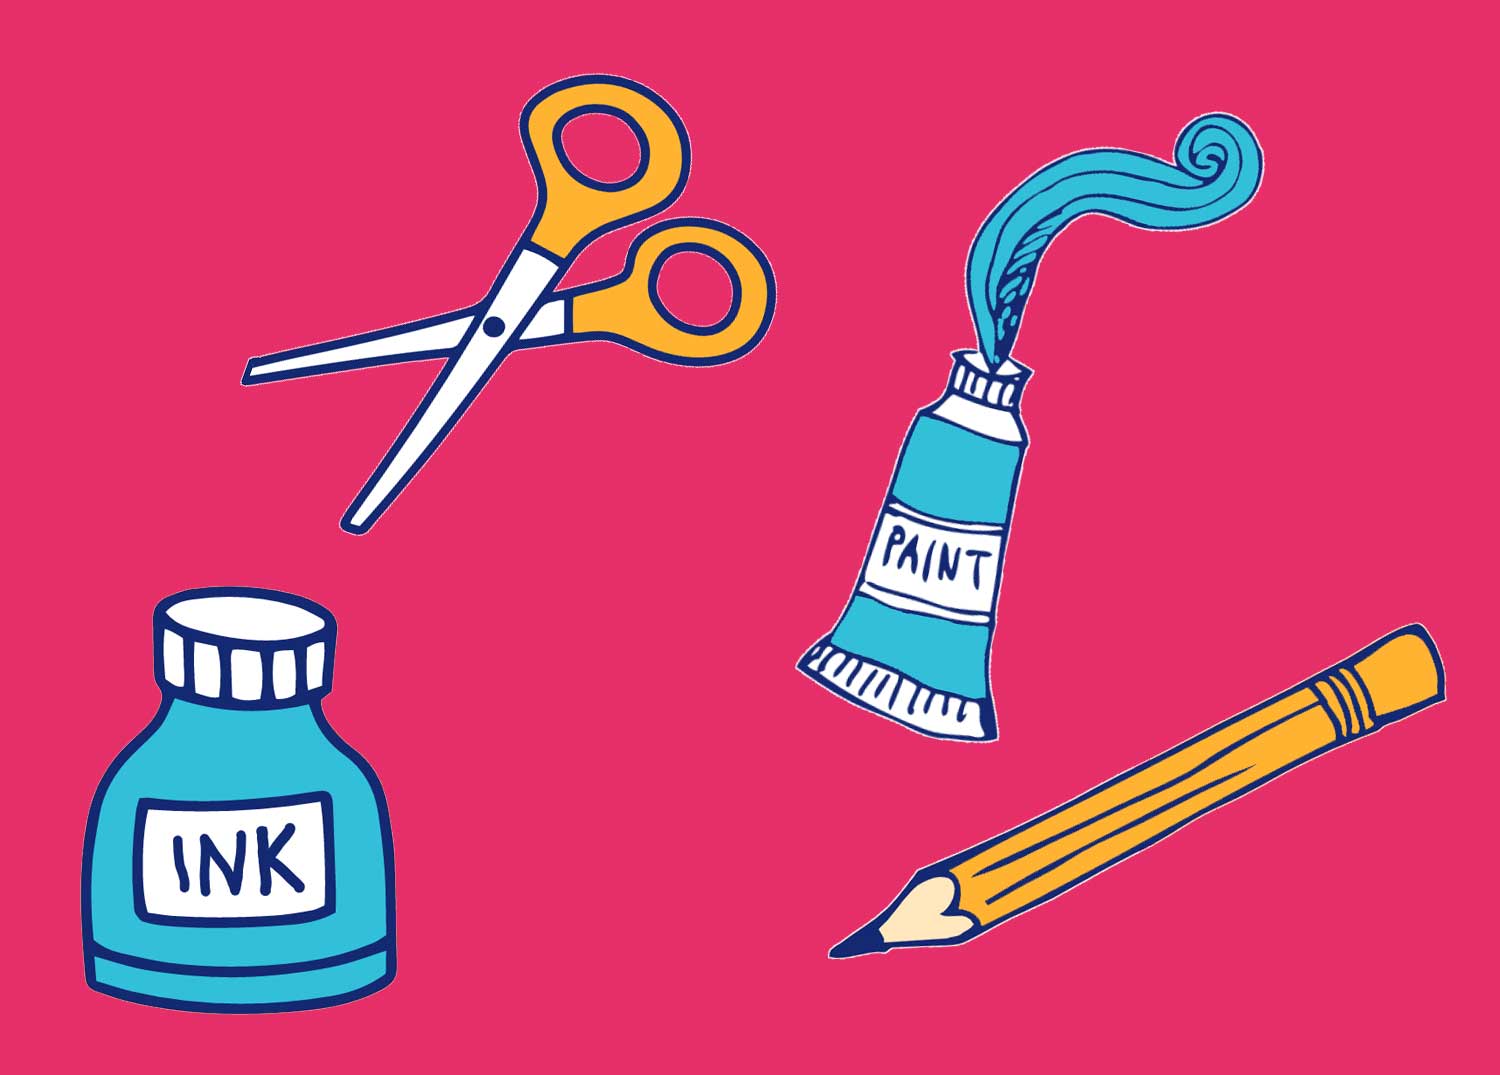 Illustration of paint, ink, scissors and a pencil on a pink background.